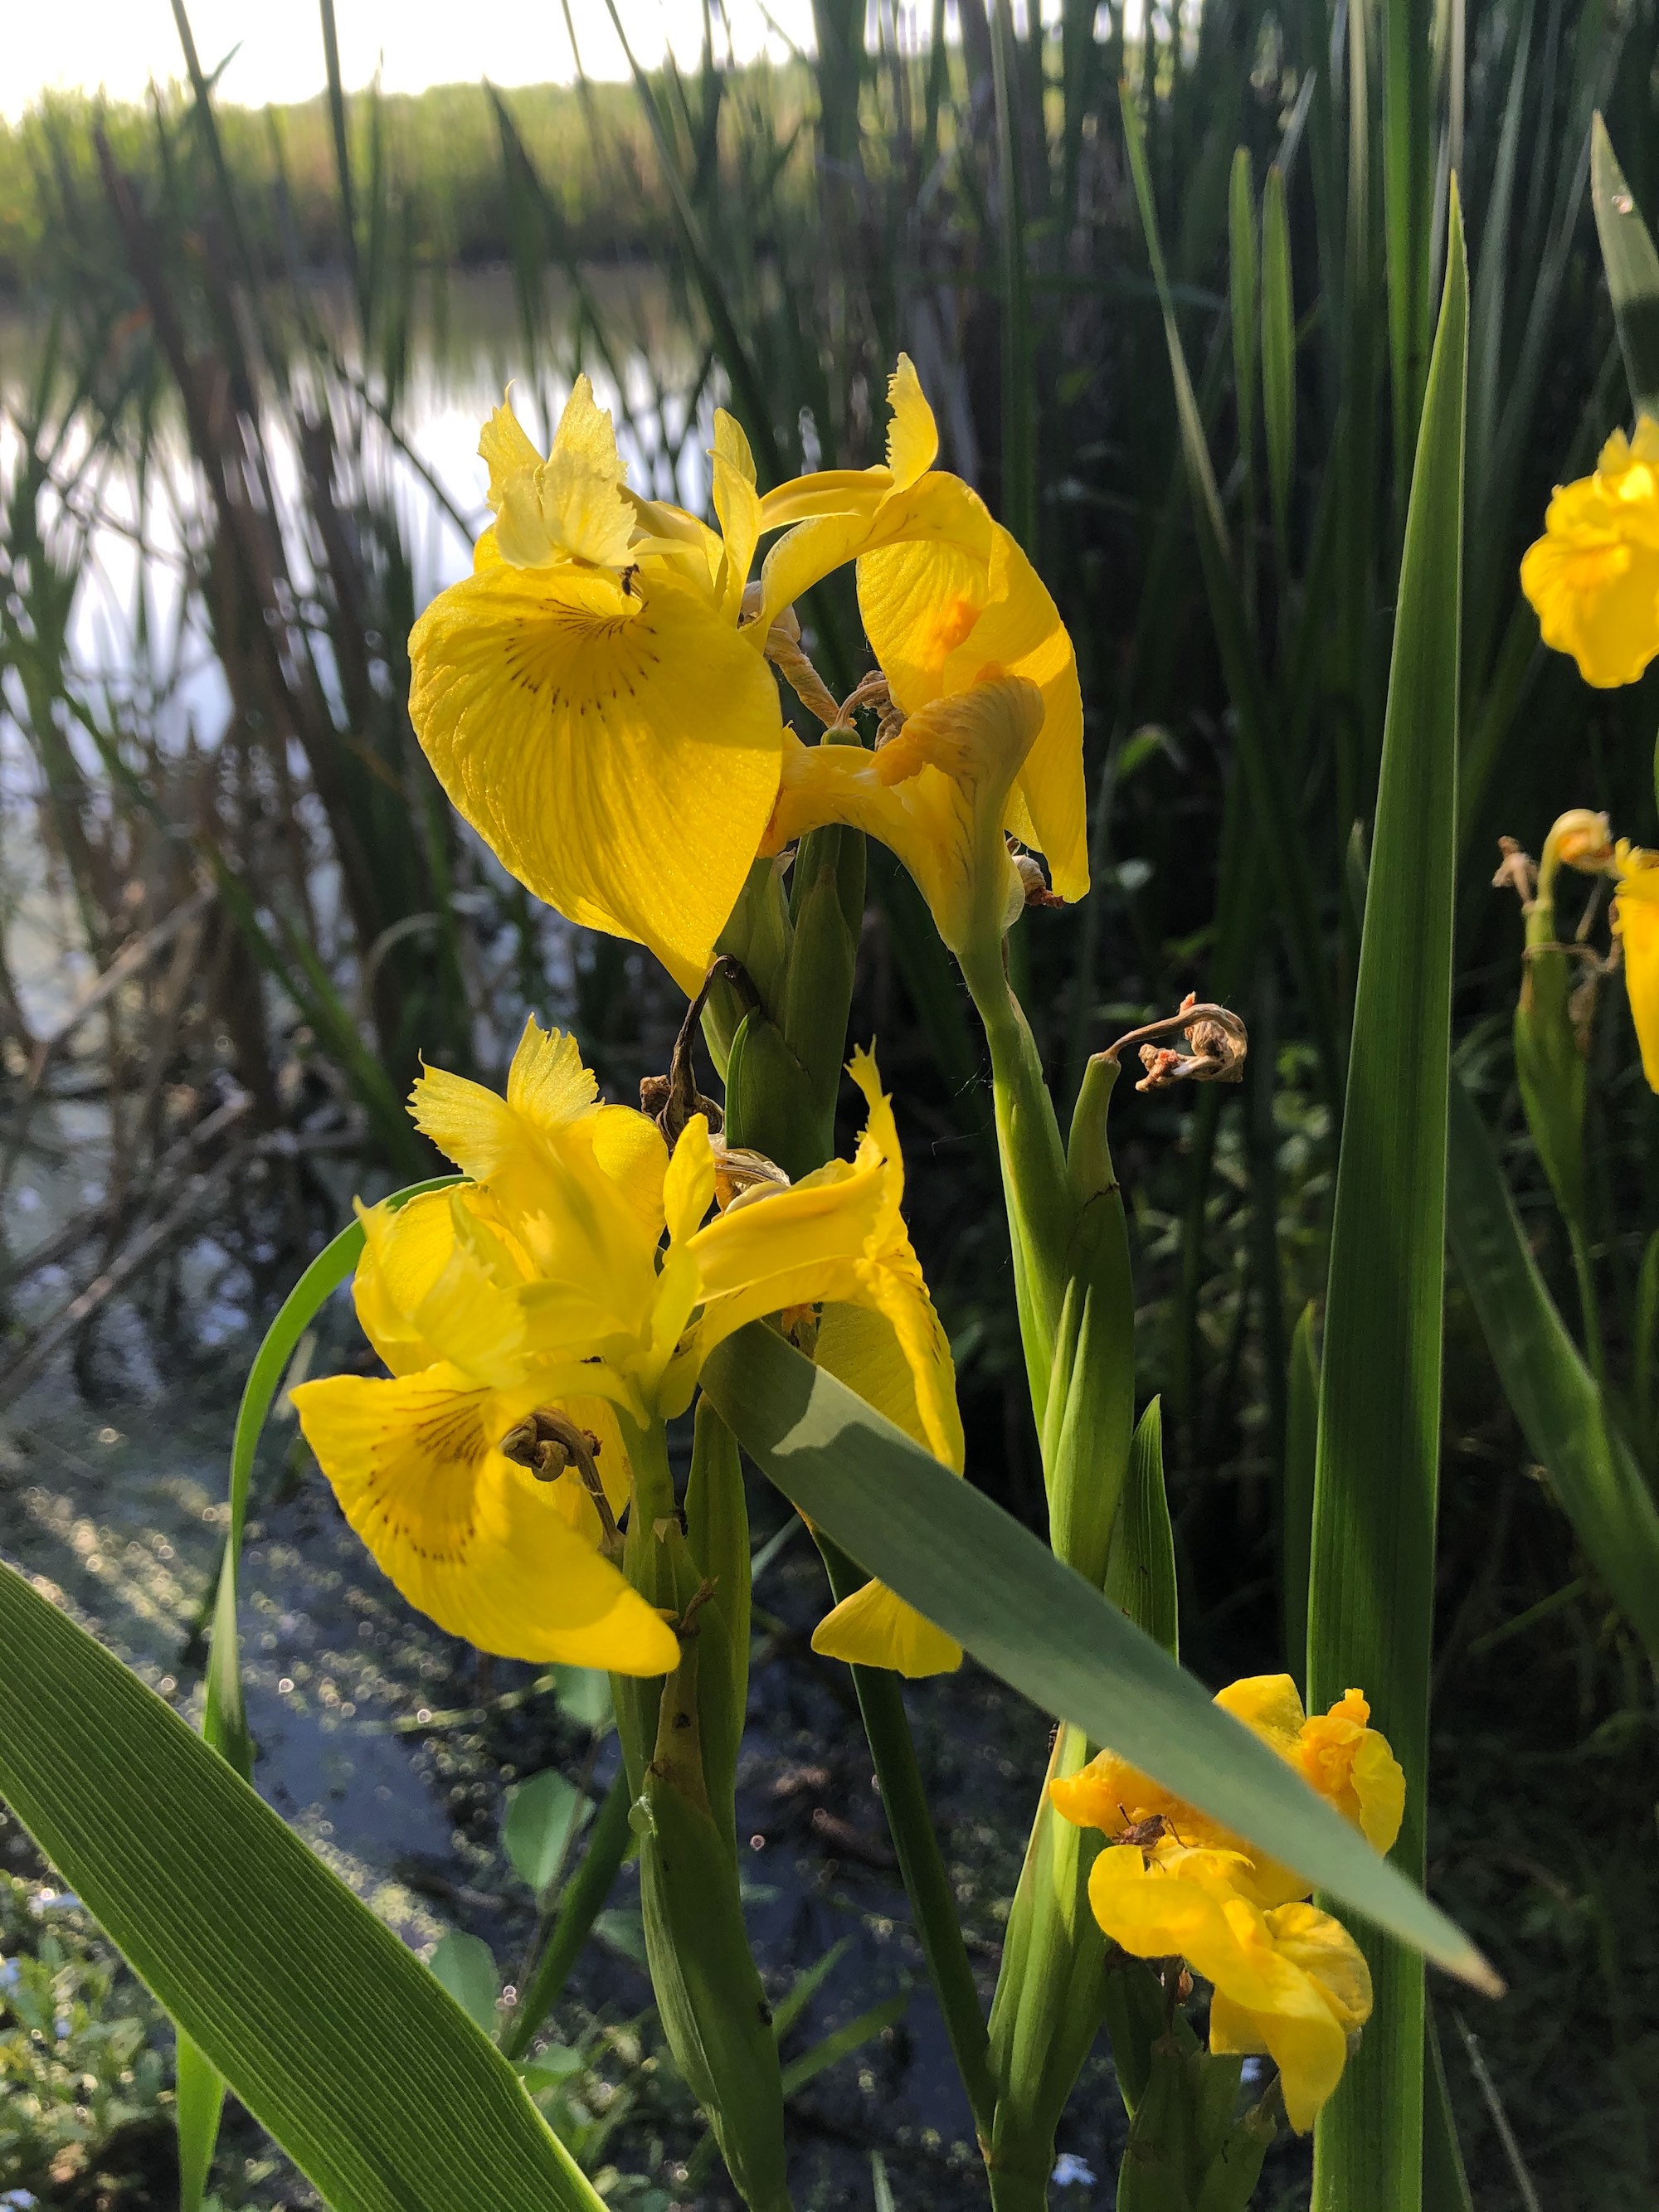 Yellow Flag Iris by Cattails on Lake Wingra on June 15, 2020.